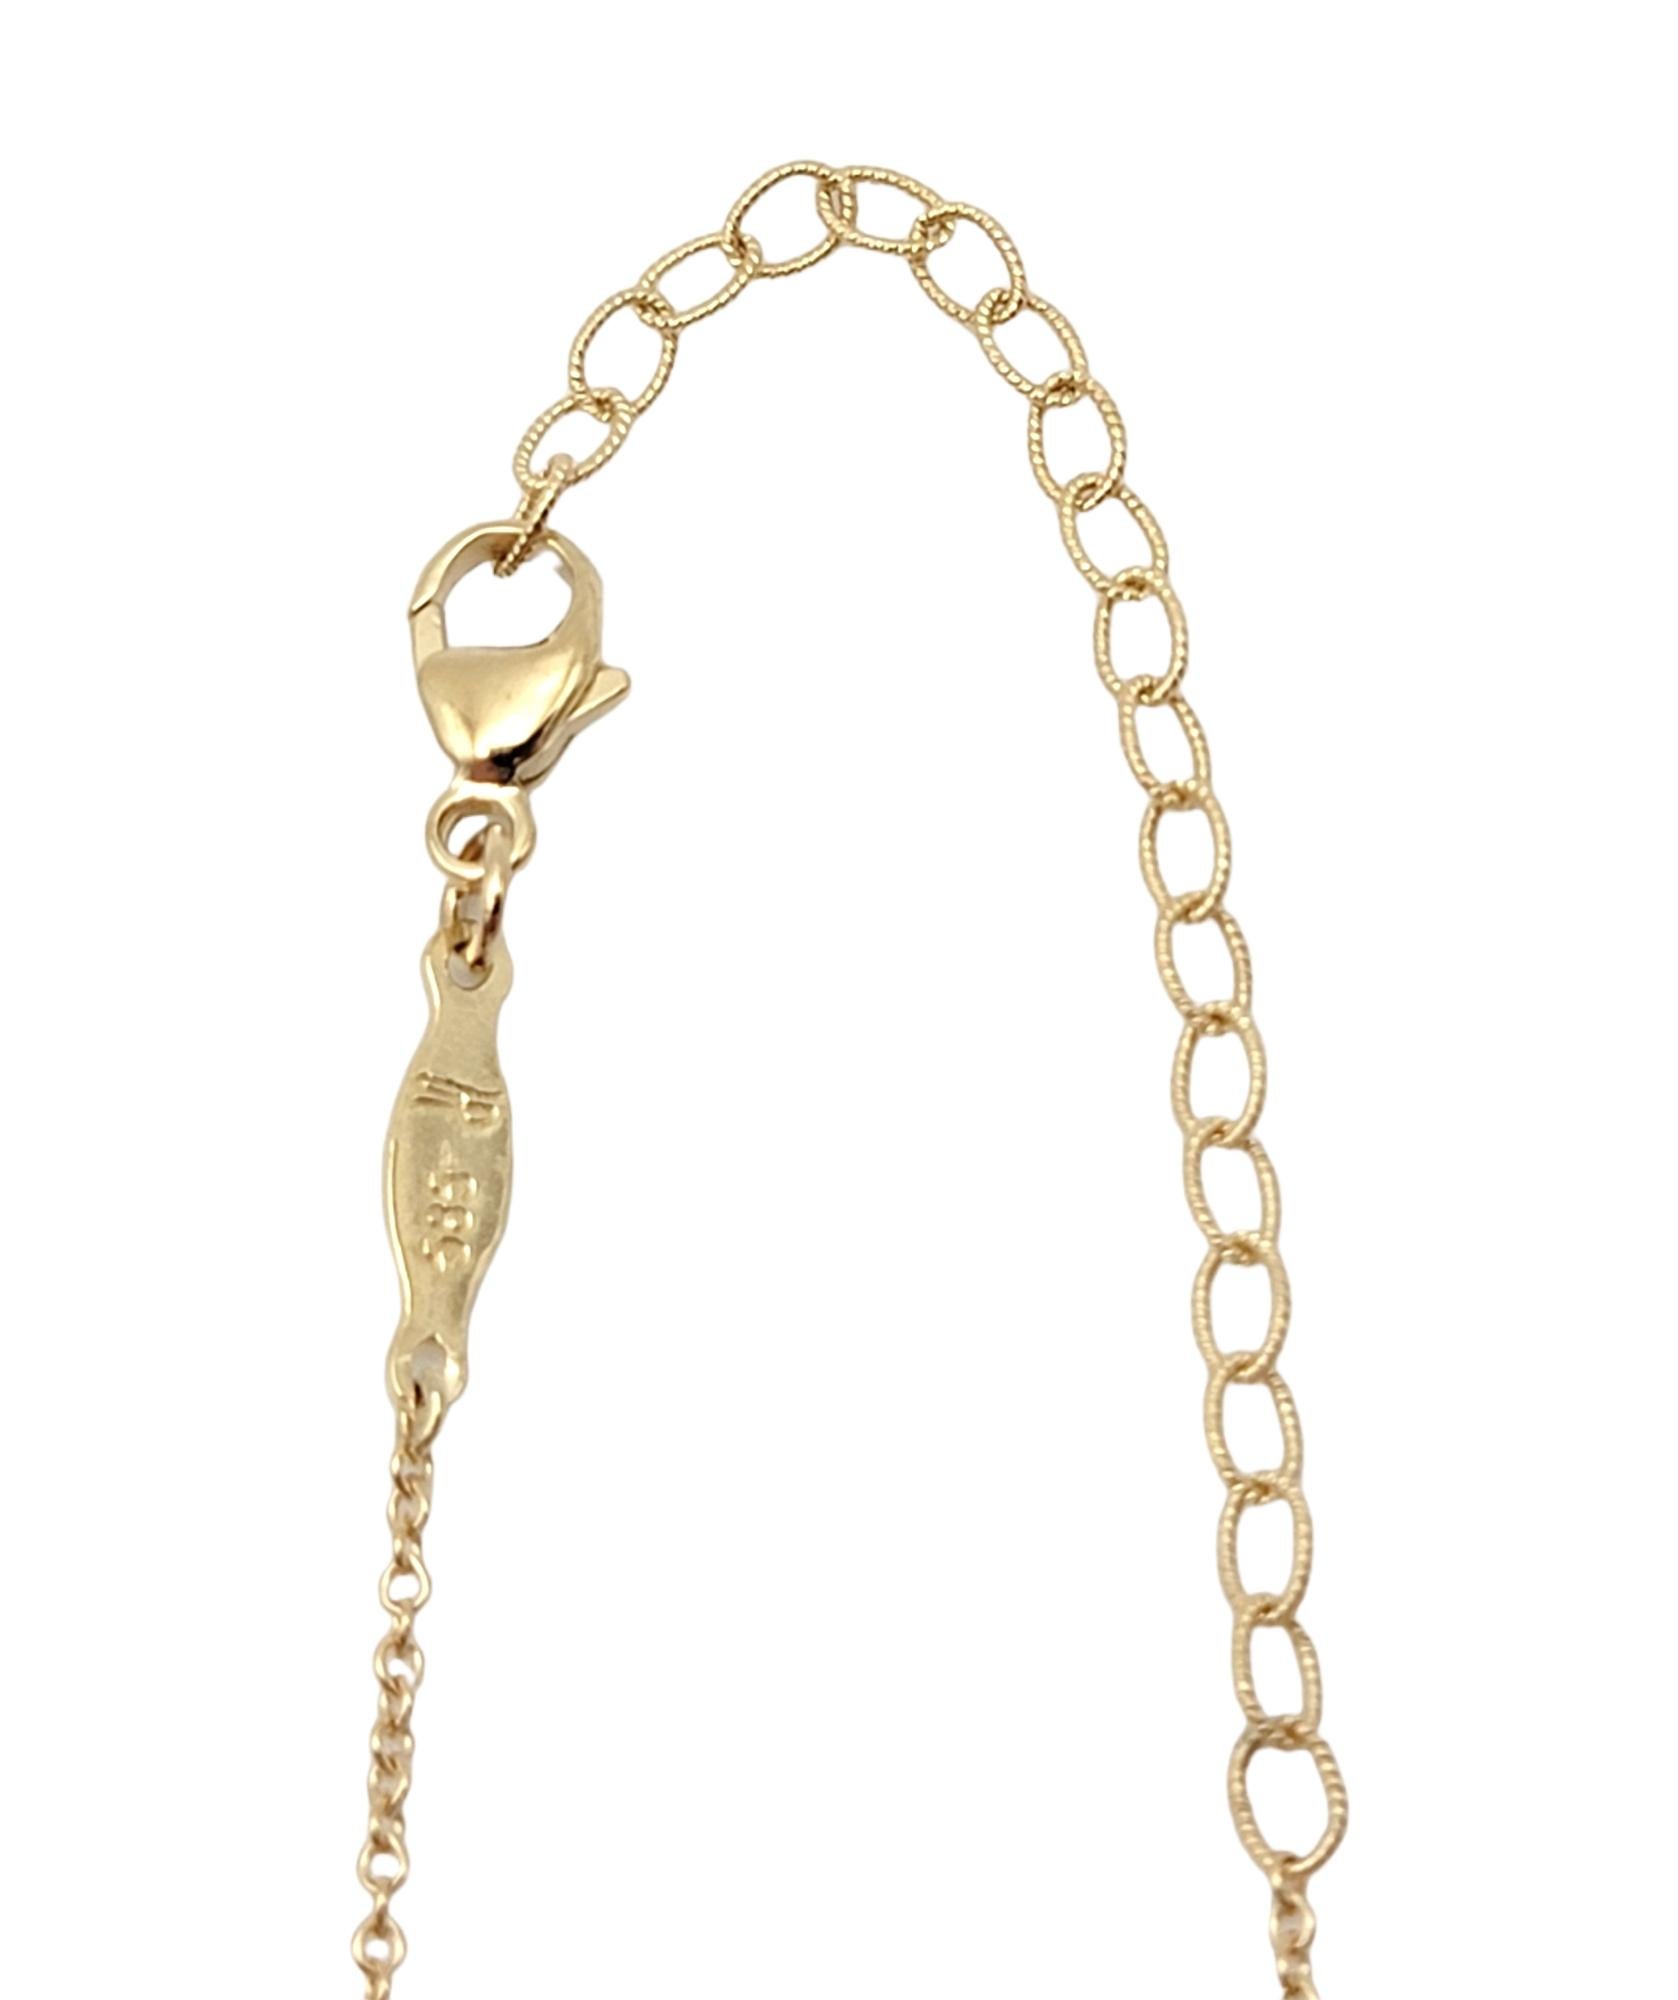 Contemporary Jacquie Aiche 3 Birds Pave Diamond Station Necklace in 14 Karat Yellow Gold